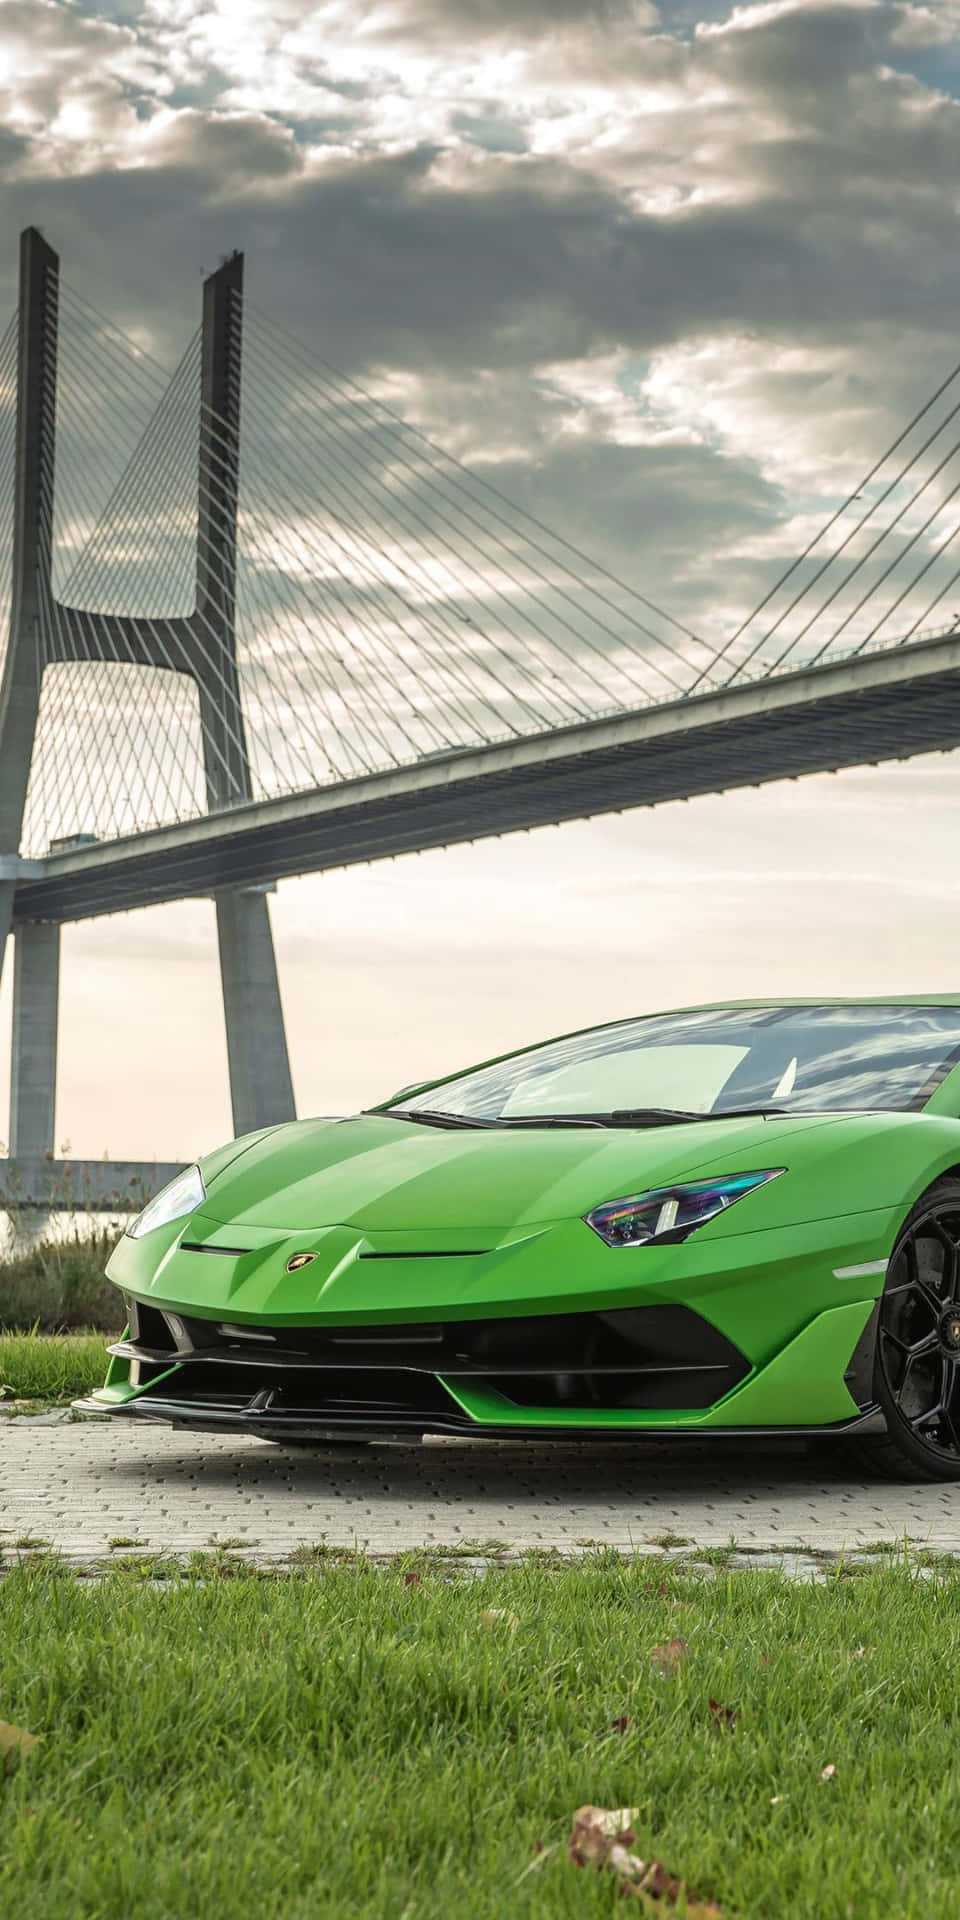 Drive in Style with a Green Lamborghini Iphone Wallpaper